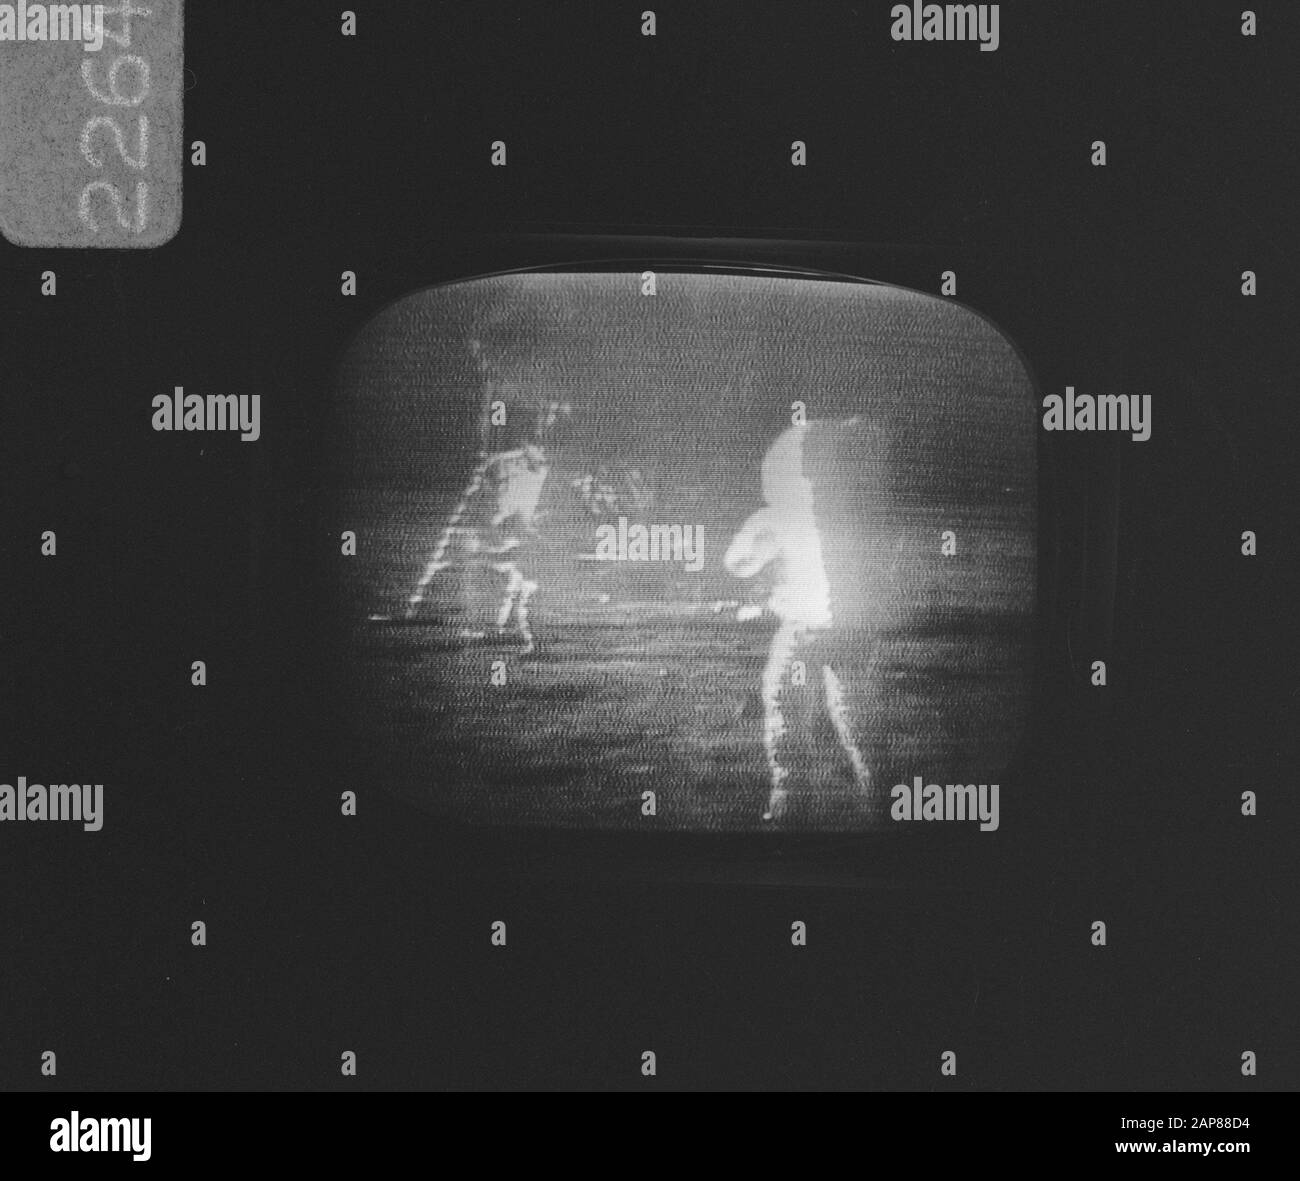 The American astronauts Neil Armstrong and Edwin Buzz Aldrin set foot on the moon; picture of the TV taken Description: Armstrong and Aldrin on the Moon Date: July 21, 1969 Keywords: moon landings, spacers, television Personal name: Aldrin, E.E., Armstrong, N.A. Stock Photo